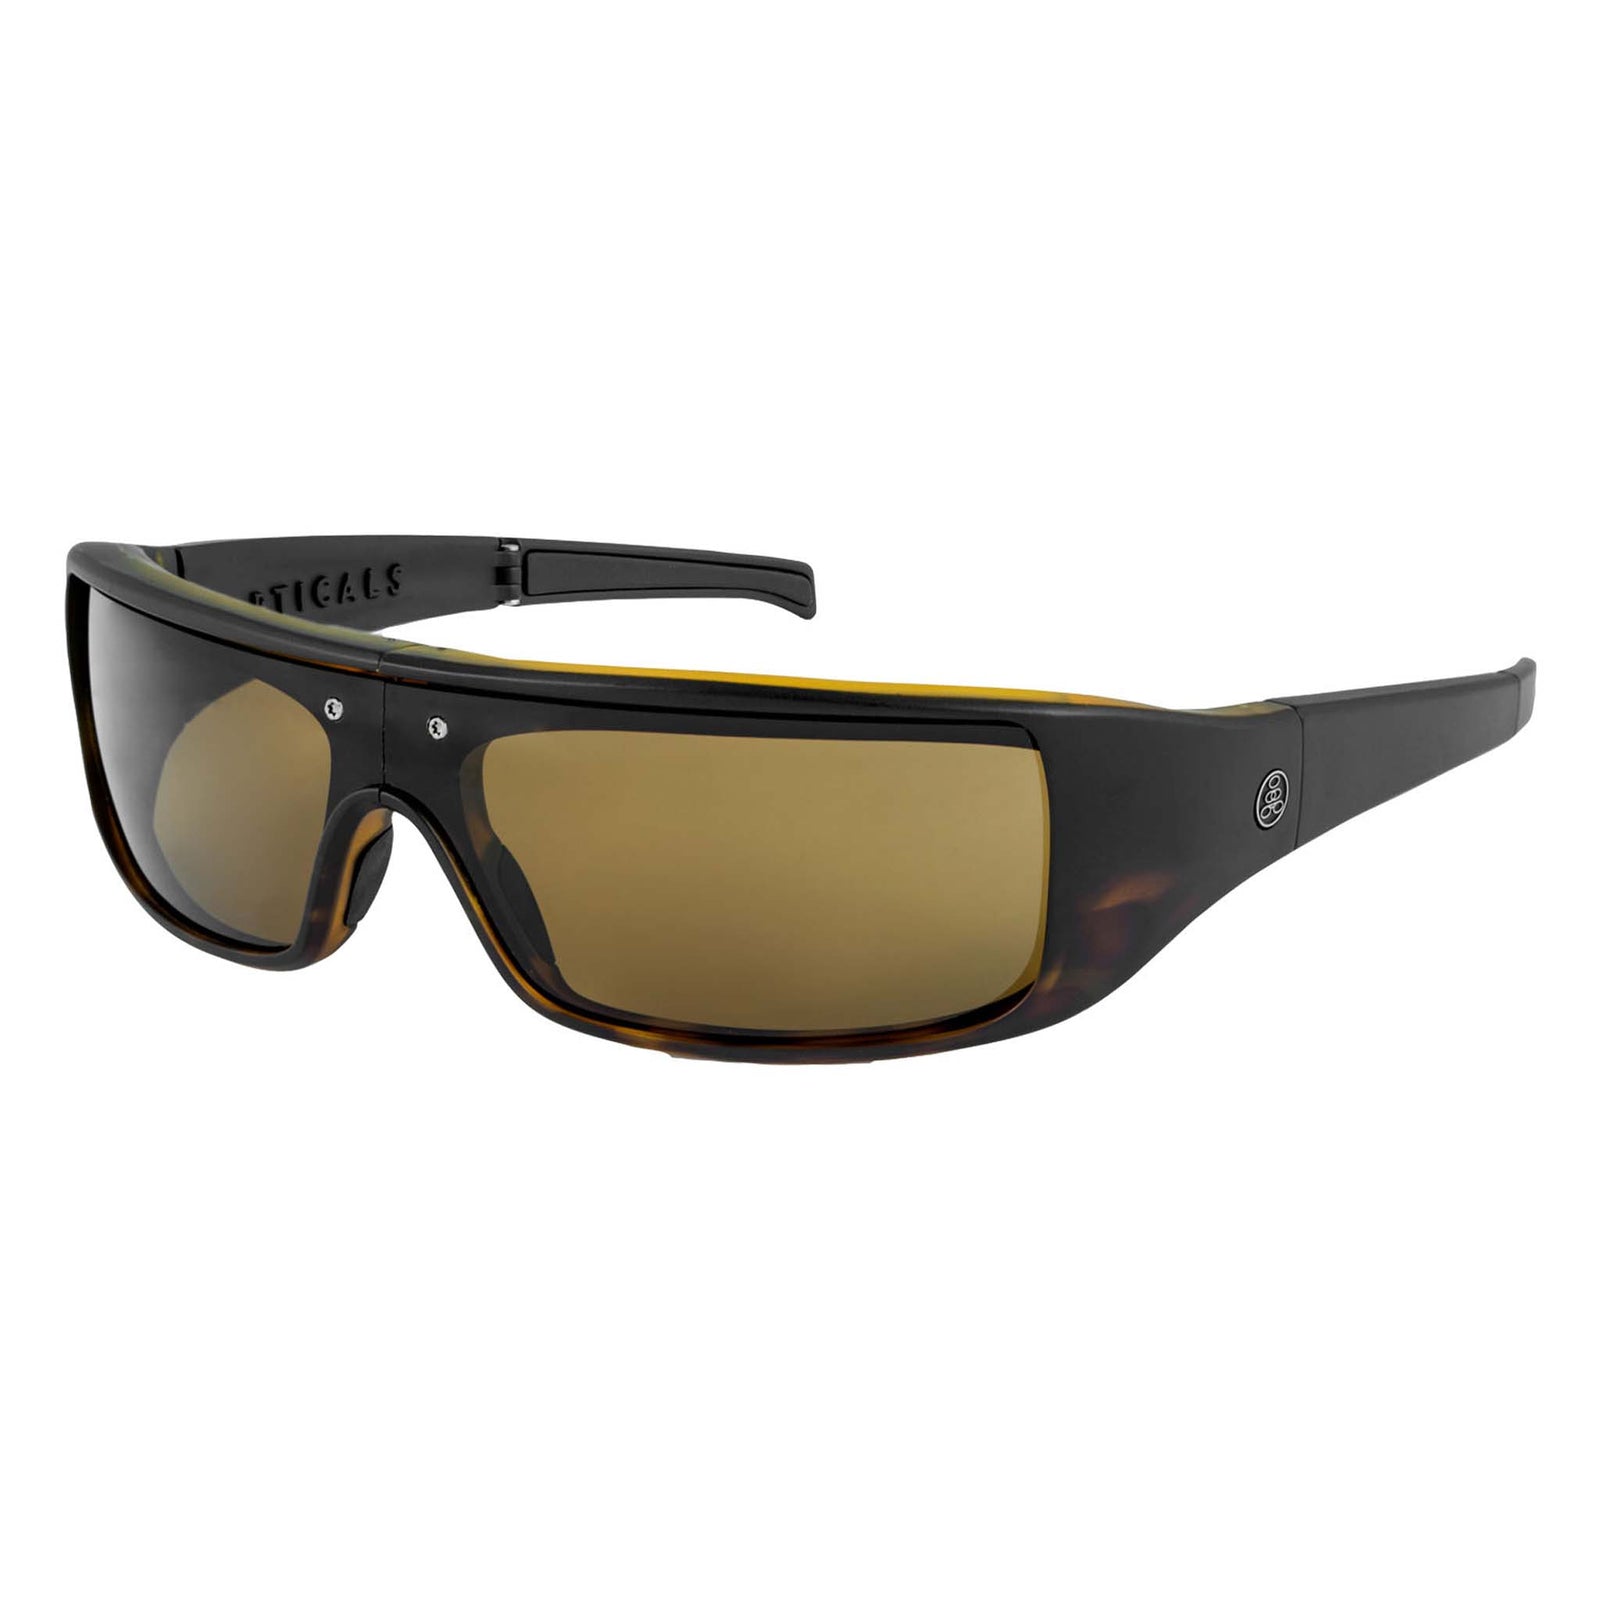 Close-up of POPGEAR sunglasses featuring non-polarized brown lenses and matte black frames